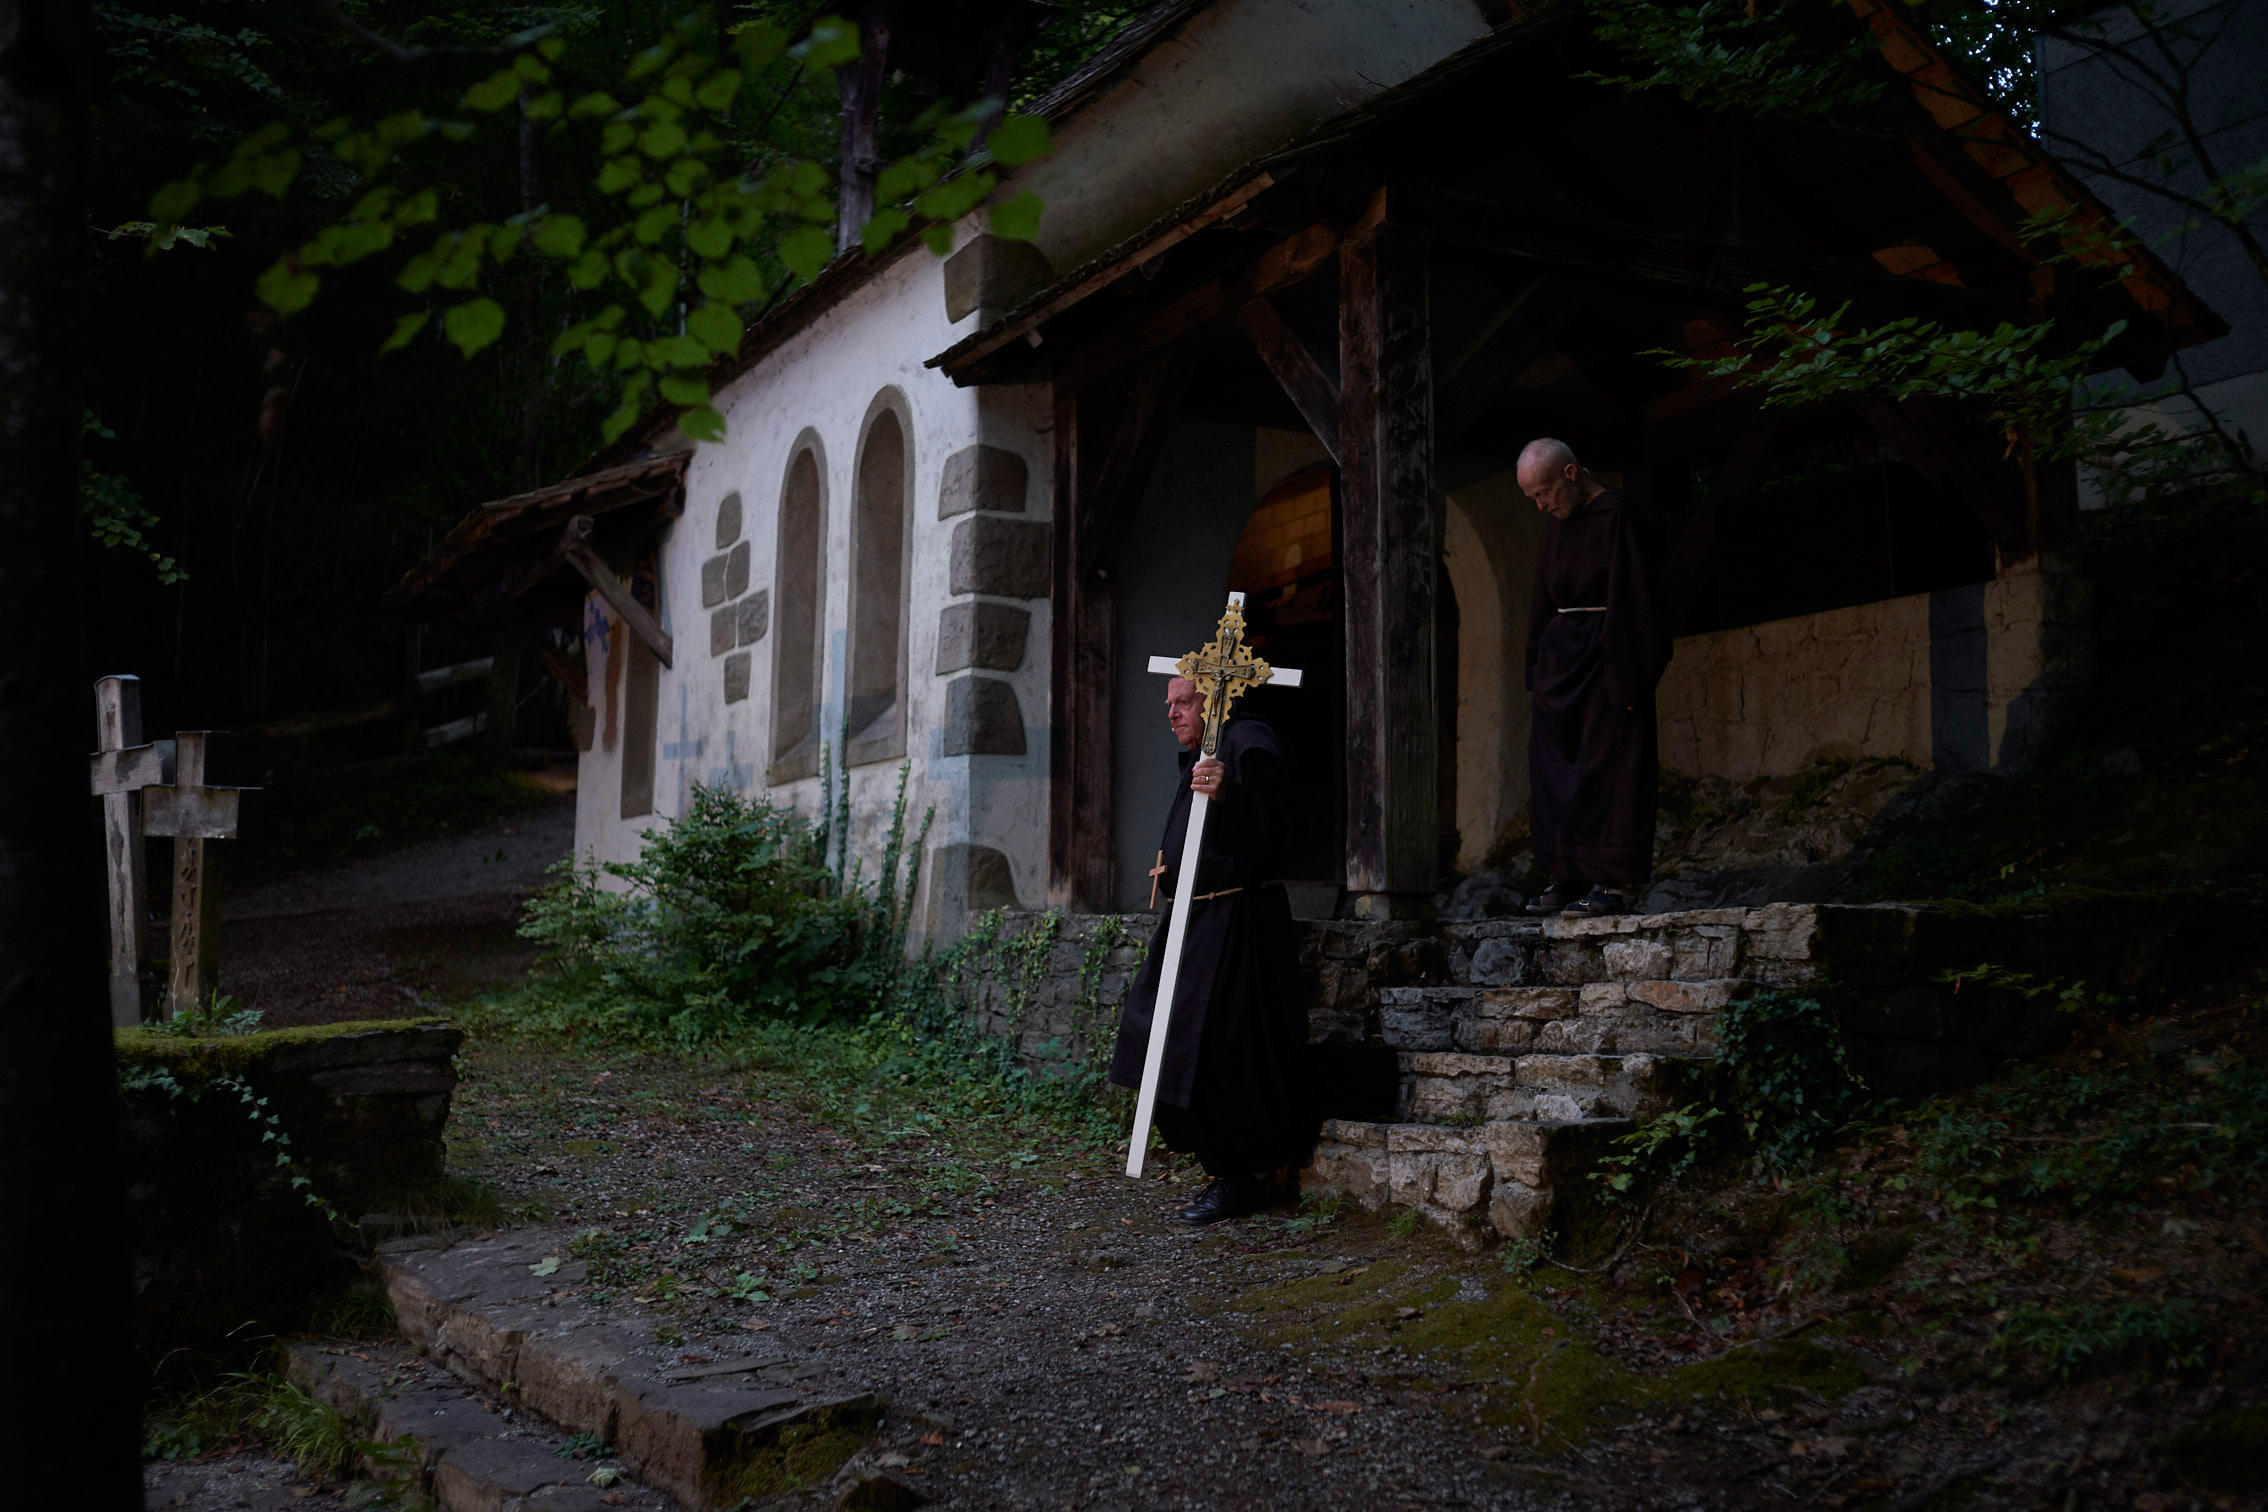 Two priests, one carrying a large white cross, walk down steps in front of a house.